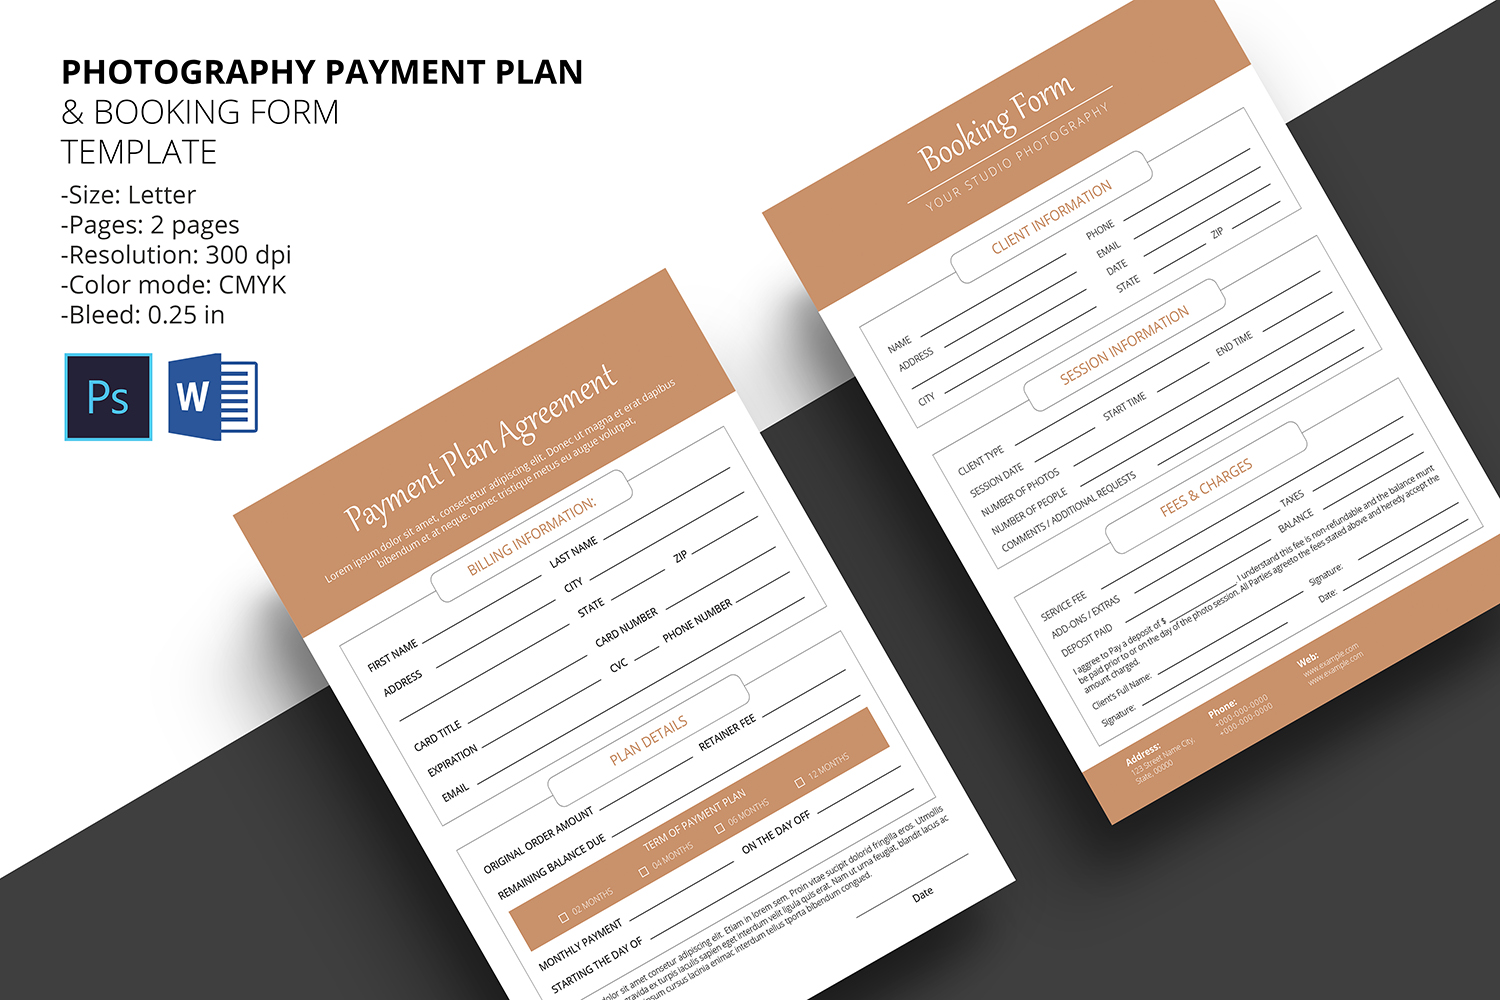 Payment Plan & Booking Form Corporate Identity Template